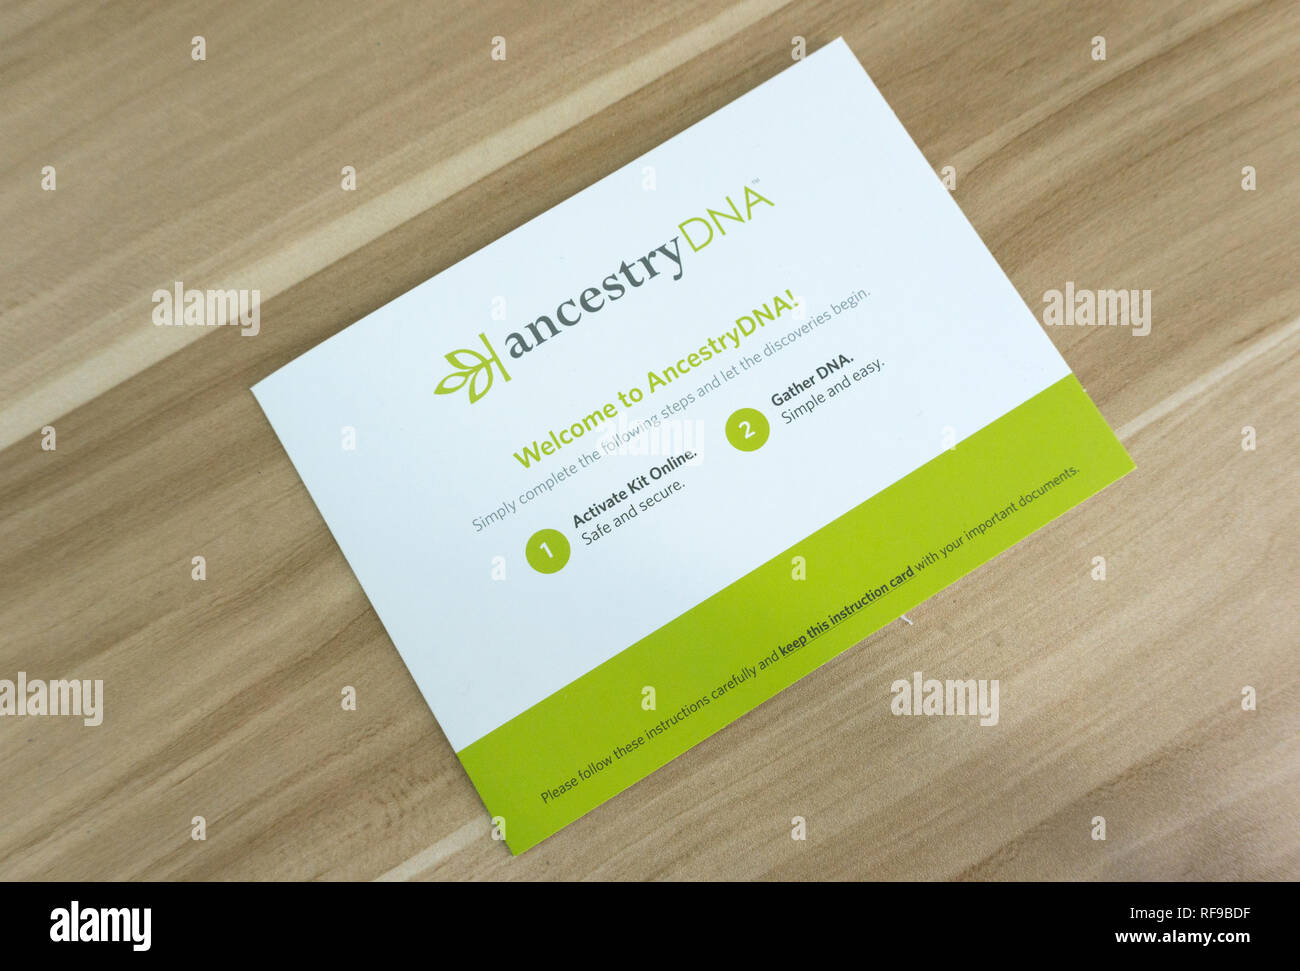 DNA testing kit from the Ancestry company. Stock Photo